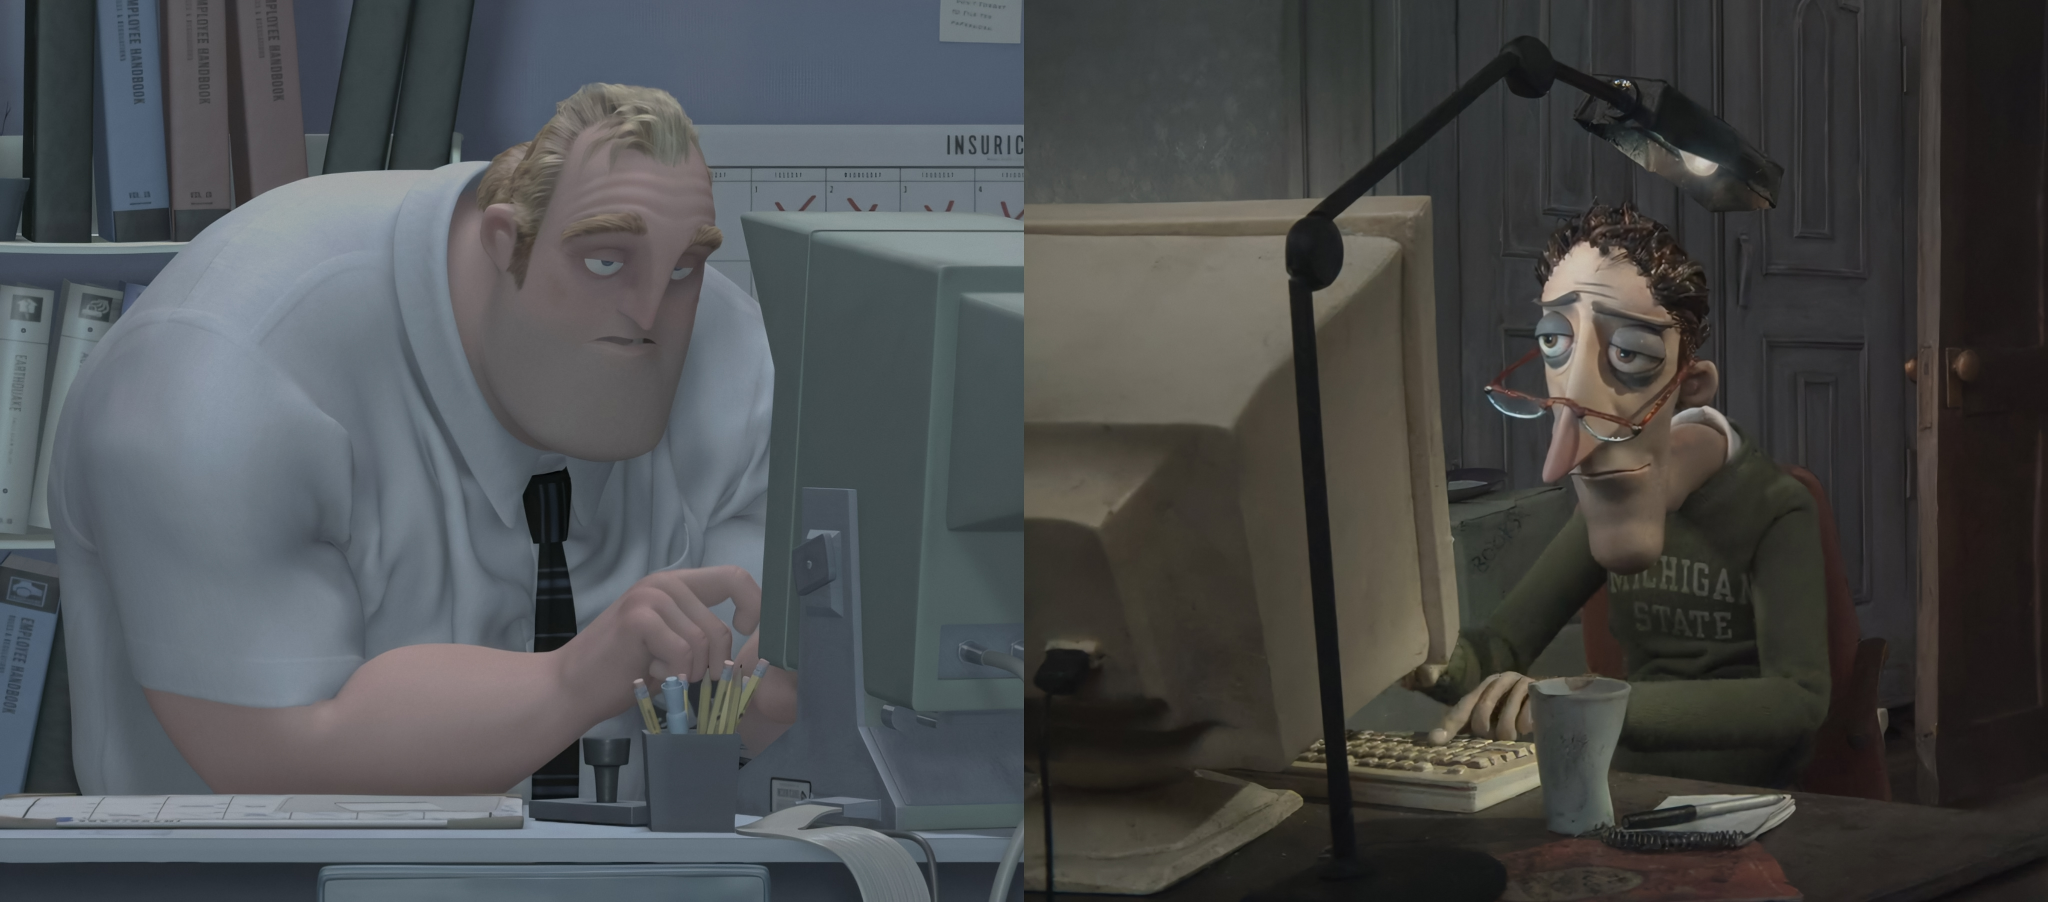 Mr. Incredible and Mr. Jones on their computers Blank Meme Template